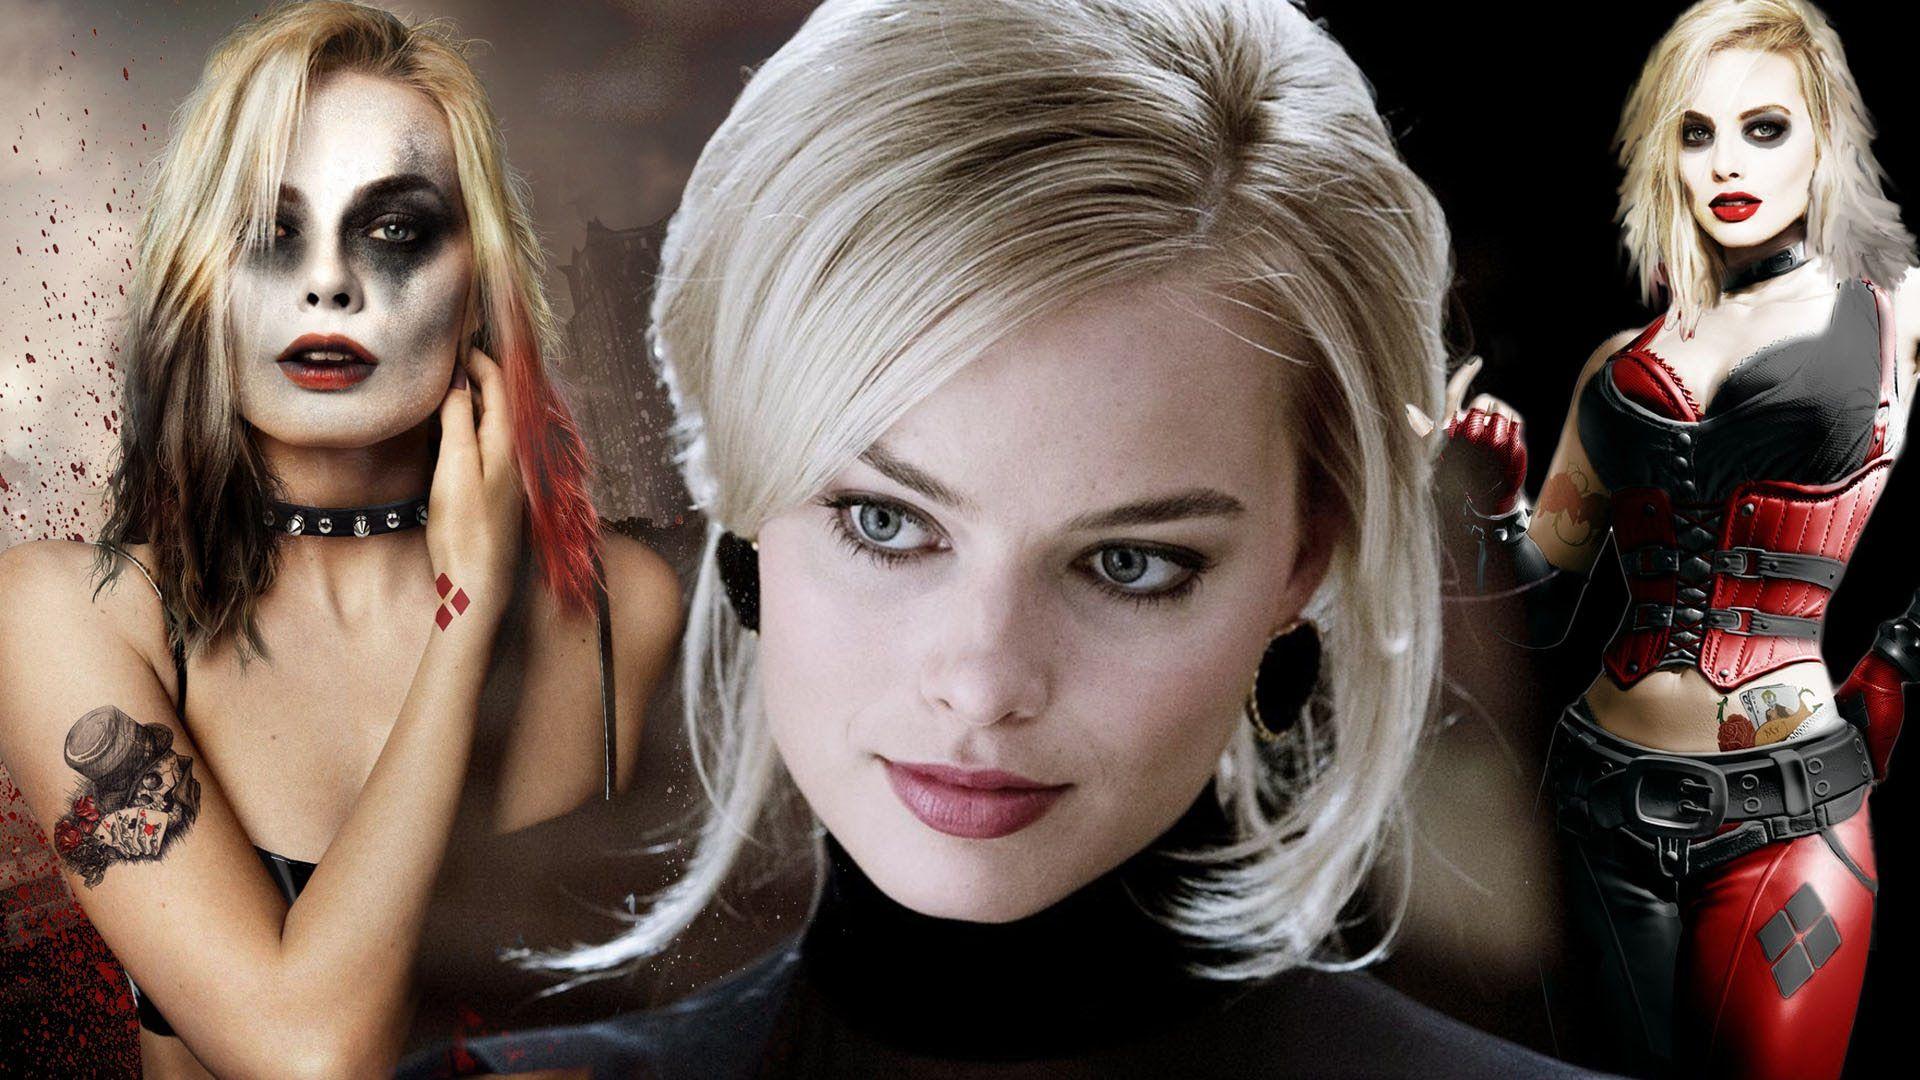 Margot Robbie as Harley Quinn is going to be AWESOME